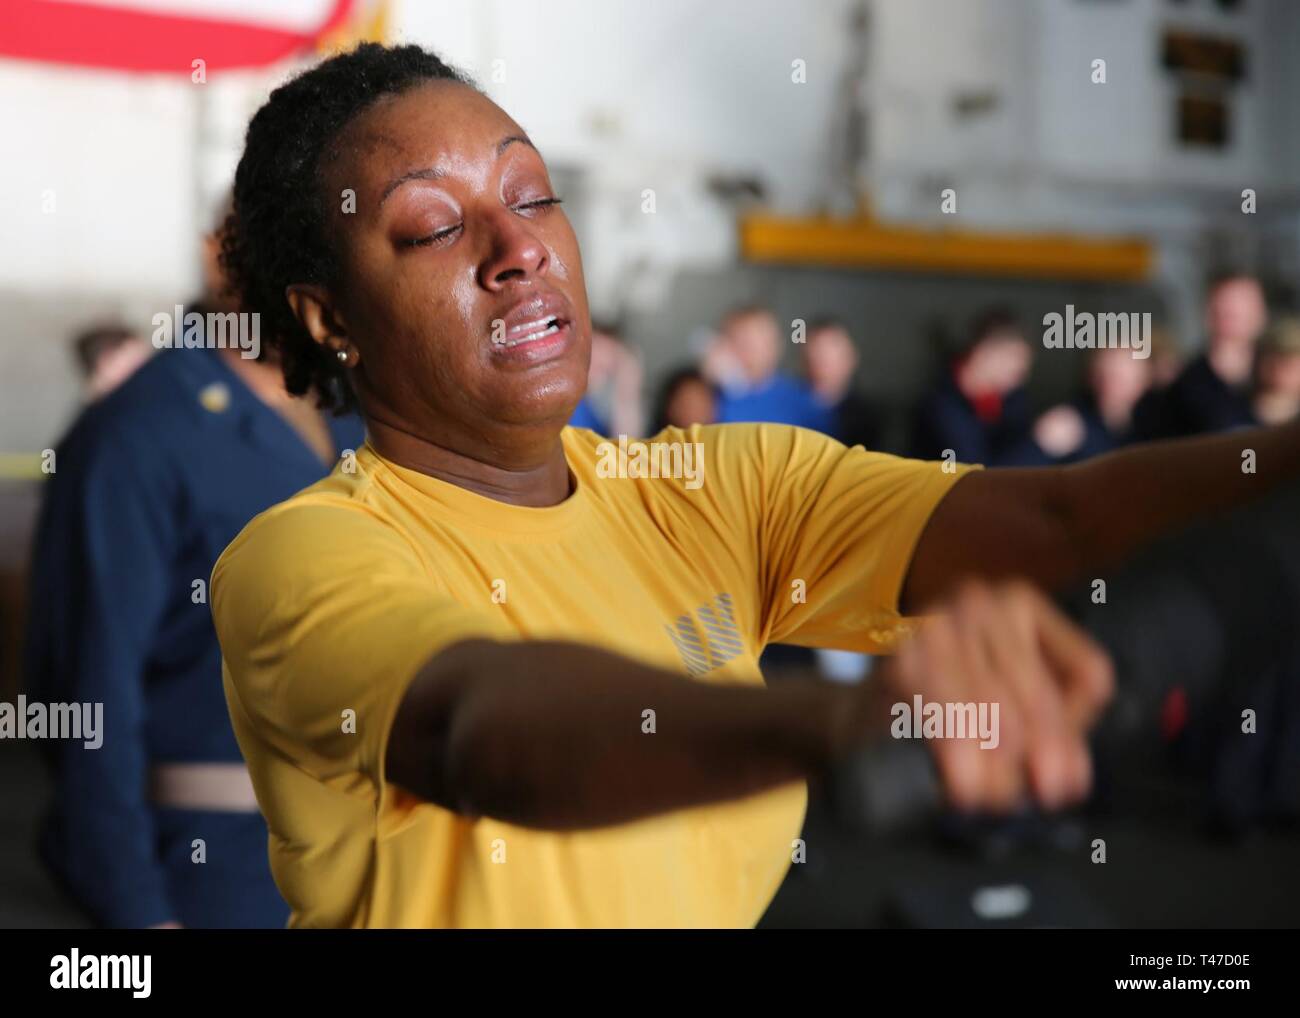 OCEAN (Mar. 15, 2019) Information Systems Technician 1st Class Chara Neal pushes back her mock attacker during an oleoresin capsicum (OC) course aboard the multipurpose amphibious assault ship USS Bataan (LHD 5) The ship is underway conducting sea trials. Stock Photo